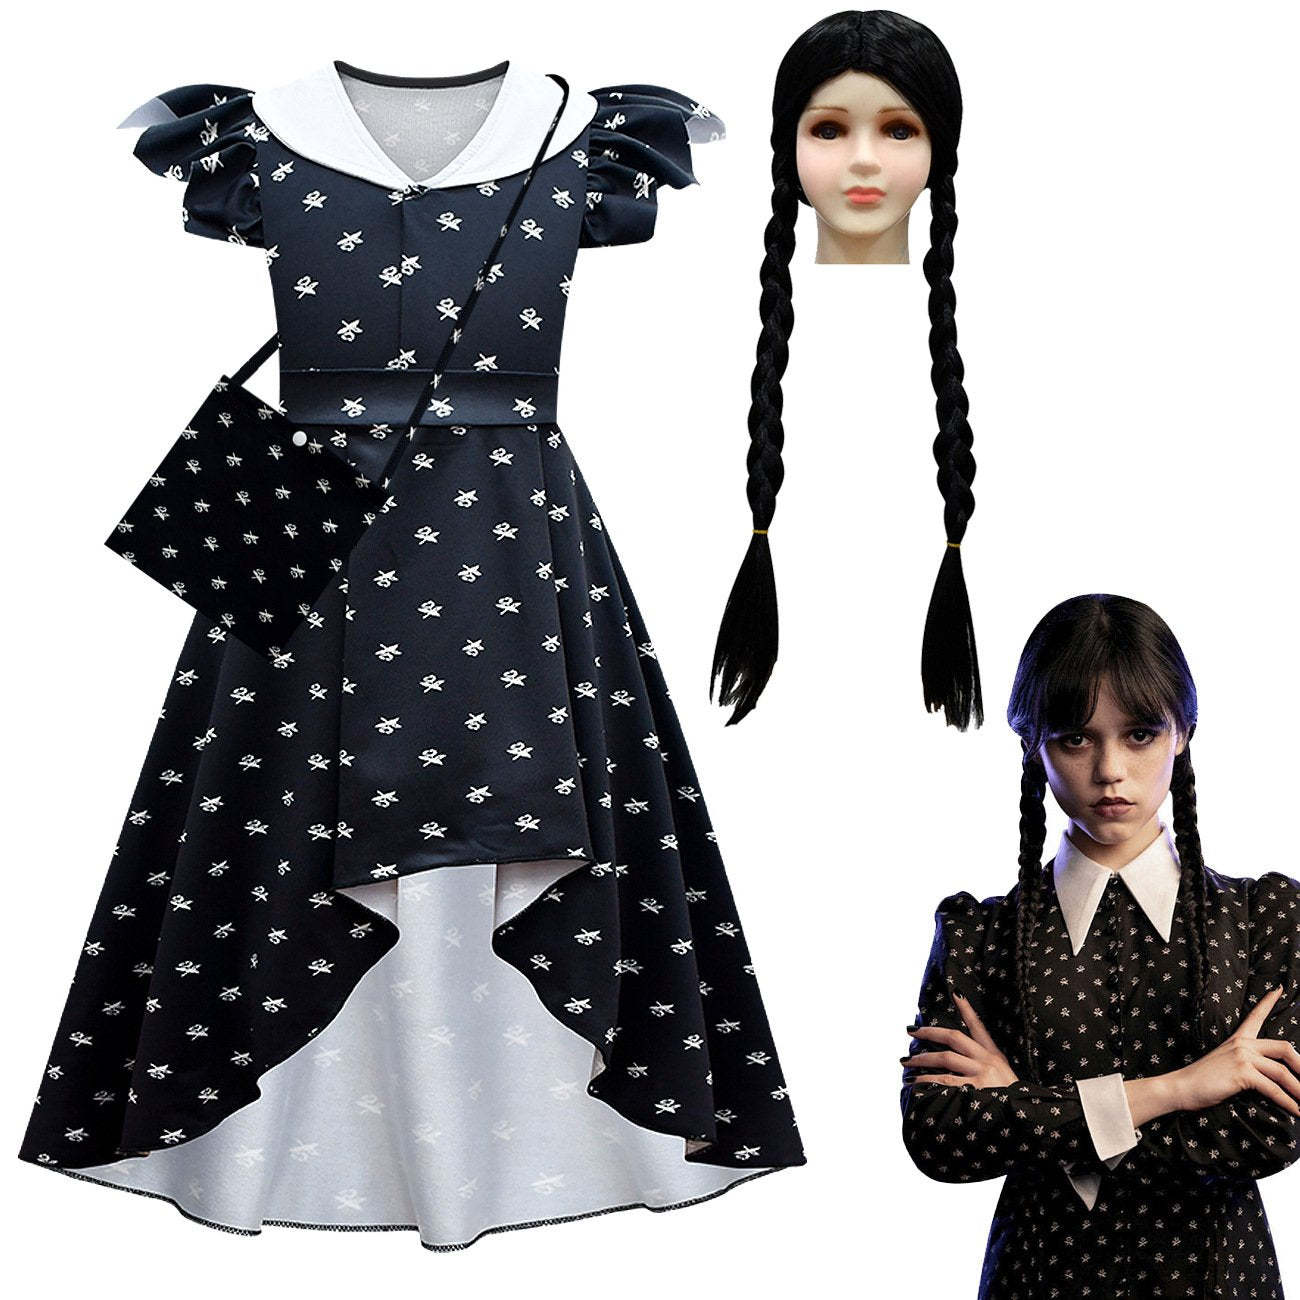 Wednesday Costume The Addams Family Cosplay Flying Sleeve Dress Set For Kids